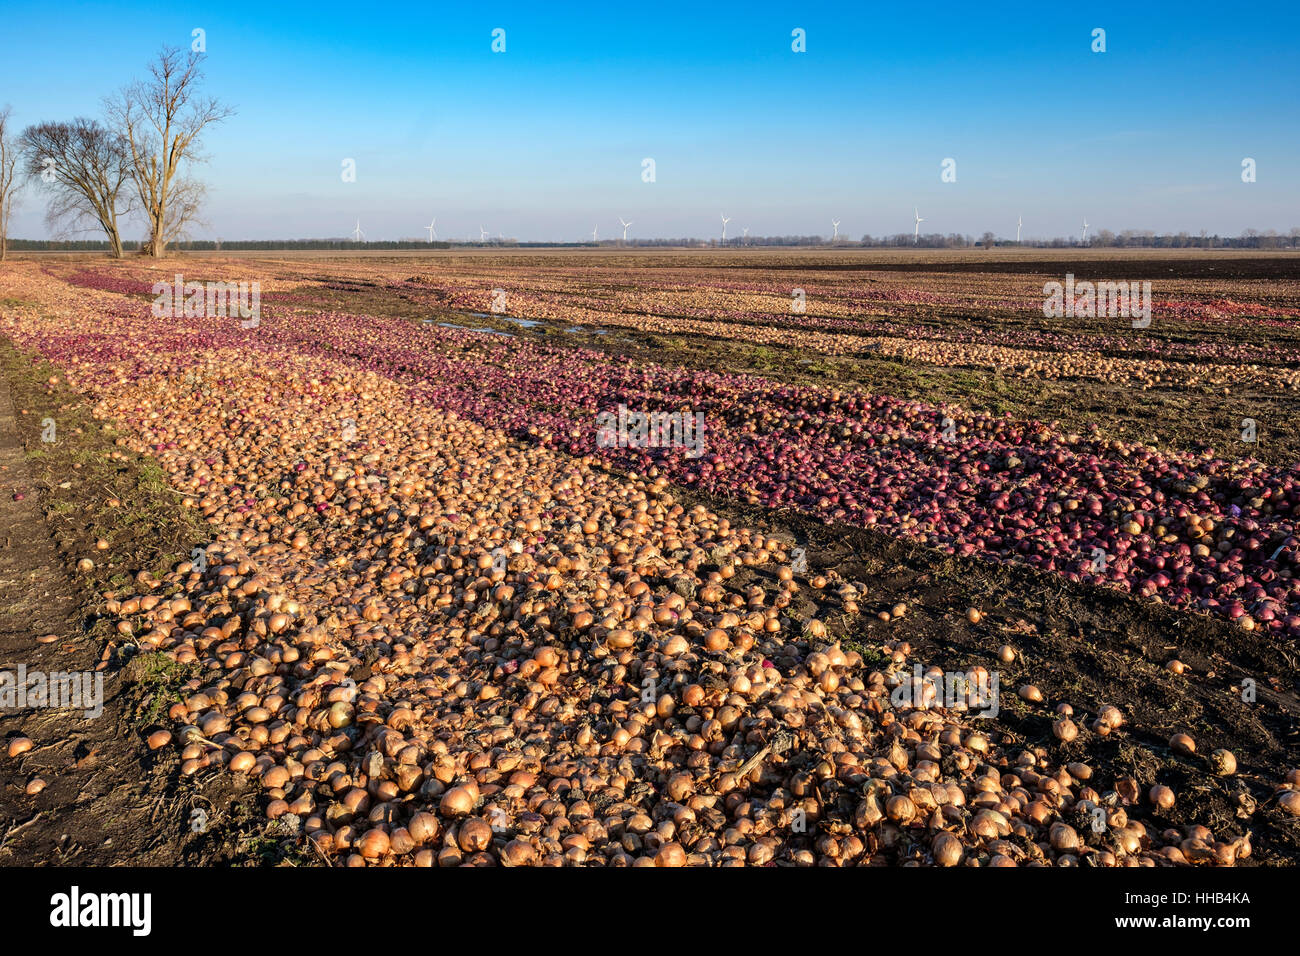 Discarded white and red onions left to rotten in a farm field in the Region of Lambton Shores, Southwest Ontario, Canada. Food waste, food wasting. Stock Photo